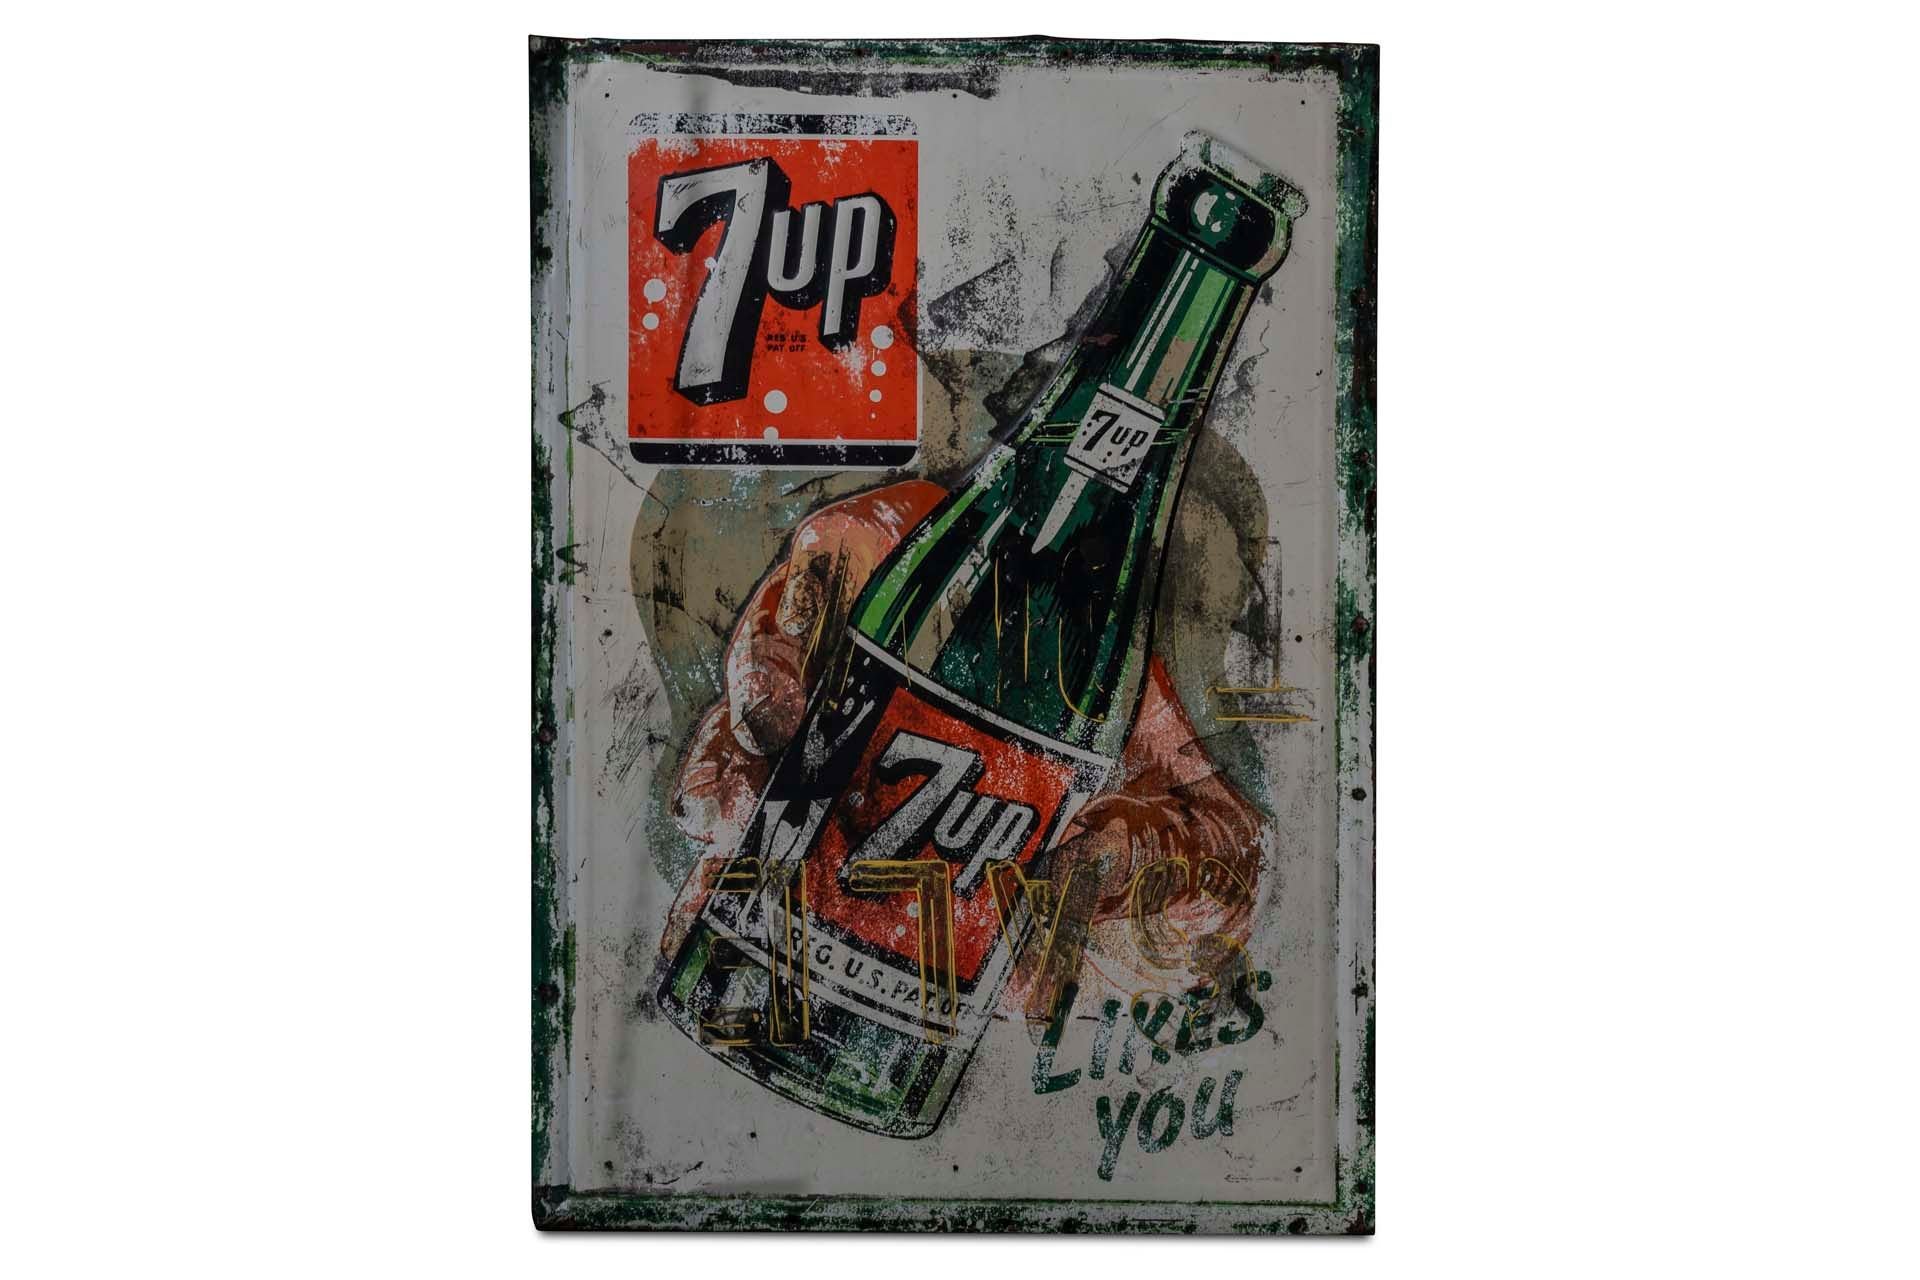 For Sale '7UP' Metal Sign